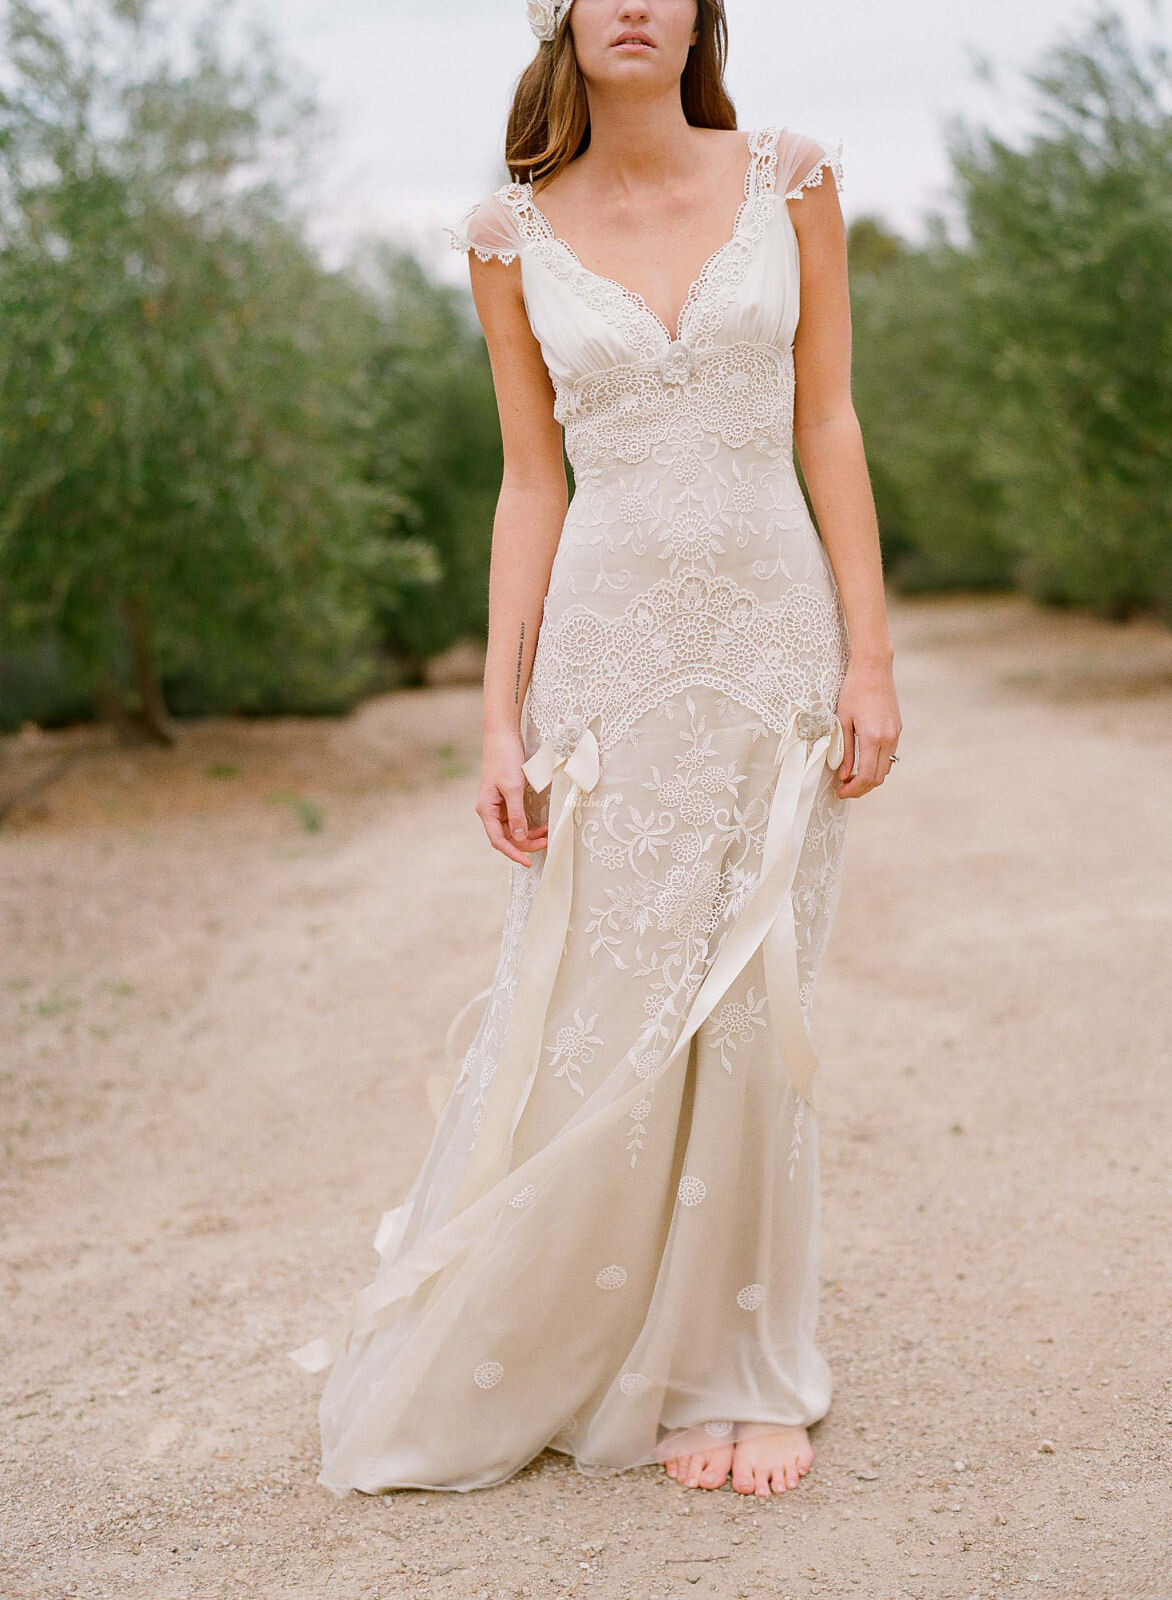 Toulouse Wedding Dress from Claire Pettibone - hitched.ie